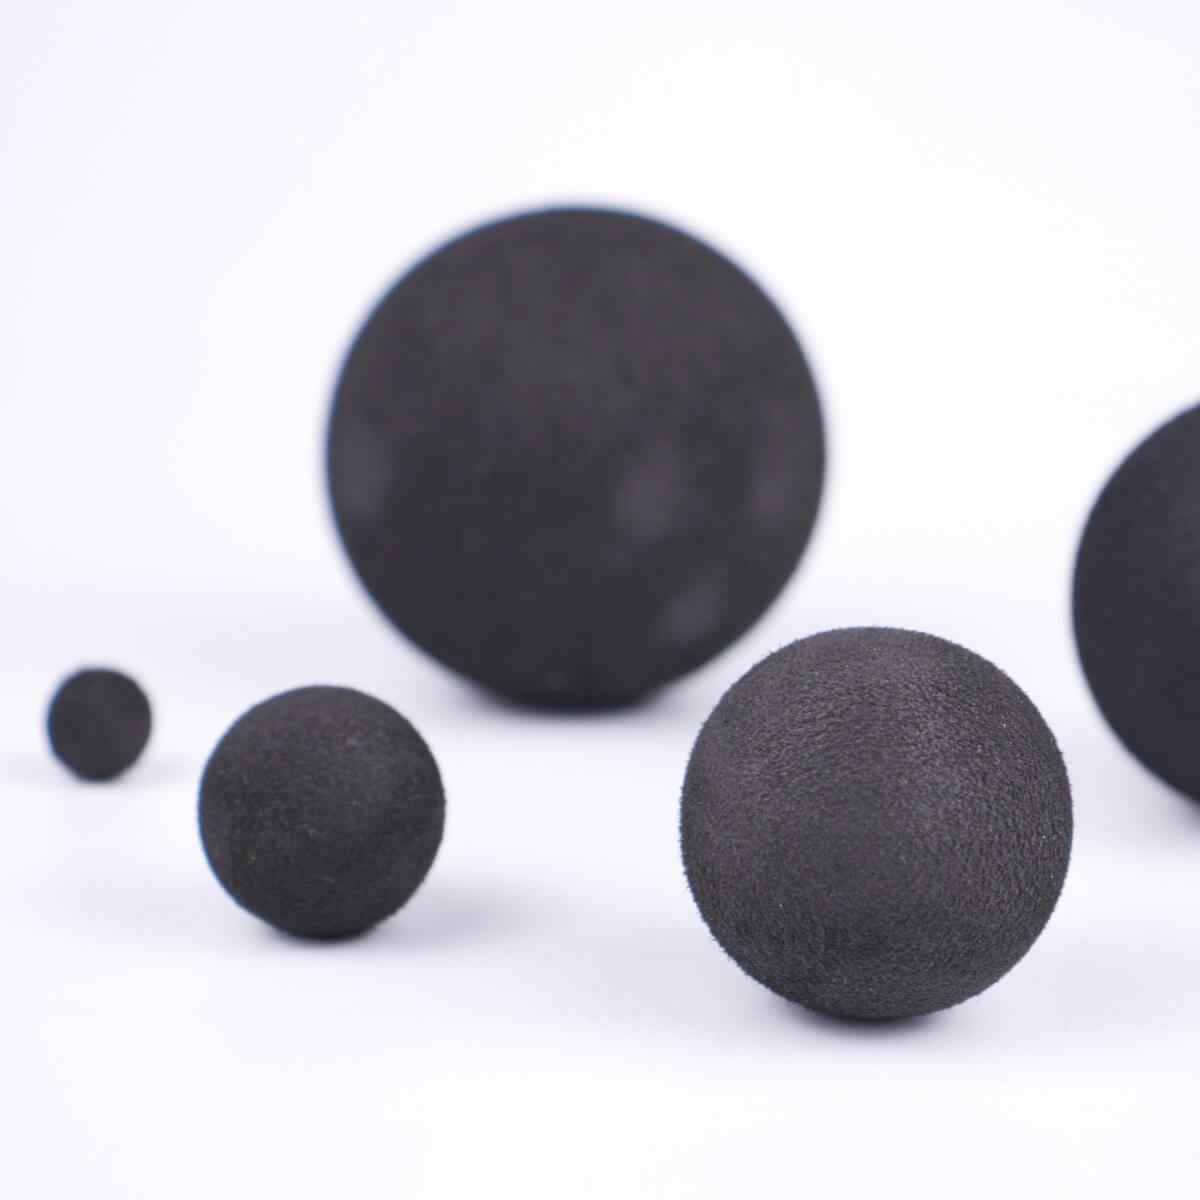 Close-up of the surface of the foam spheres